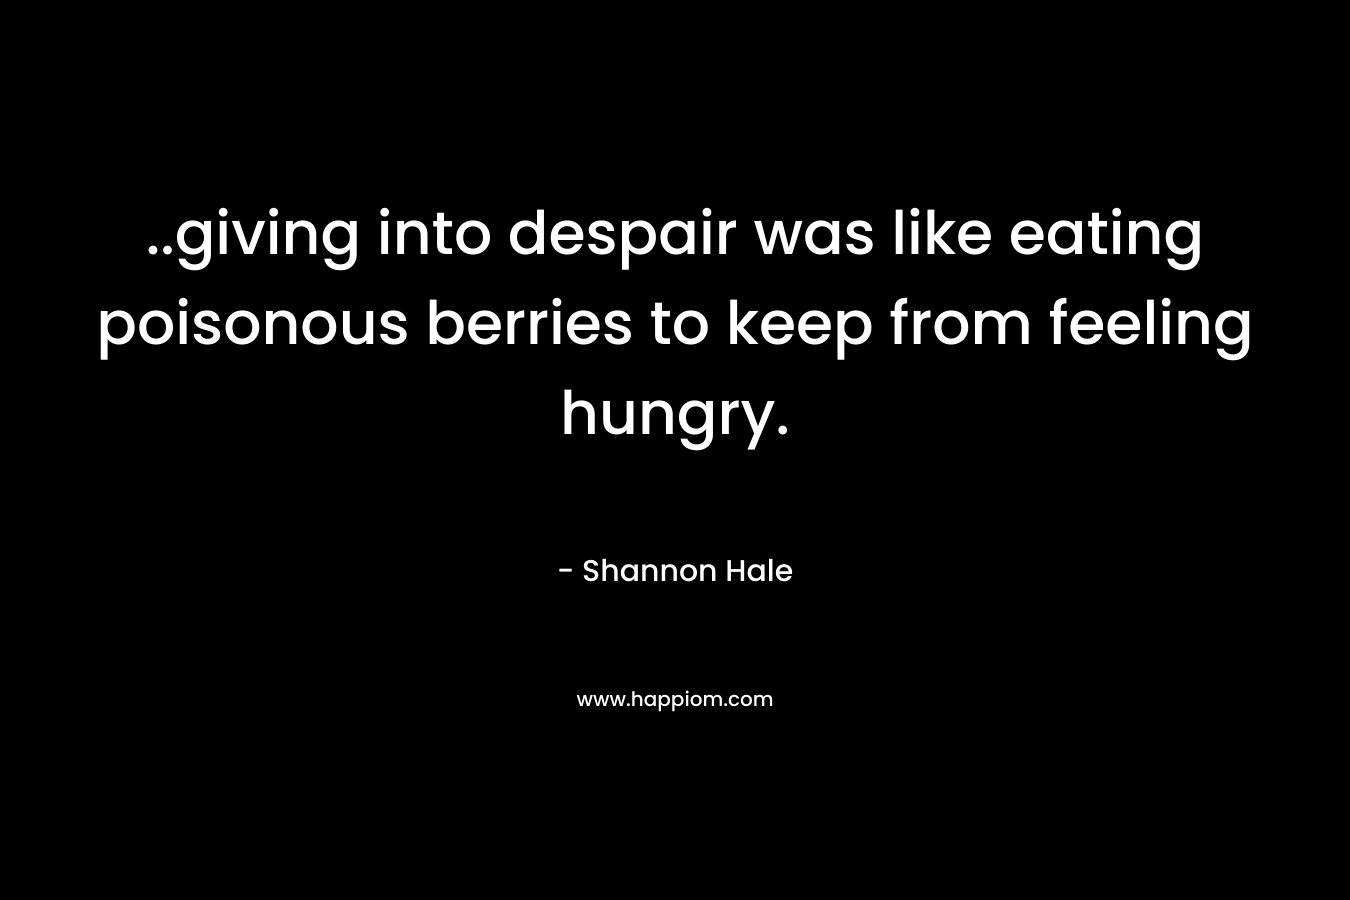 ..giving into despair was like eating poisonous berries to keep from feeling hungry. – Shannon Hale